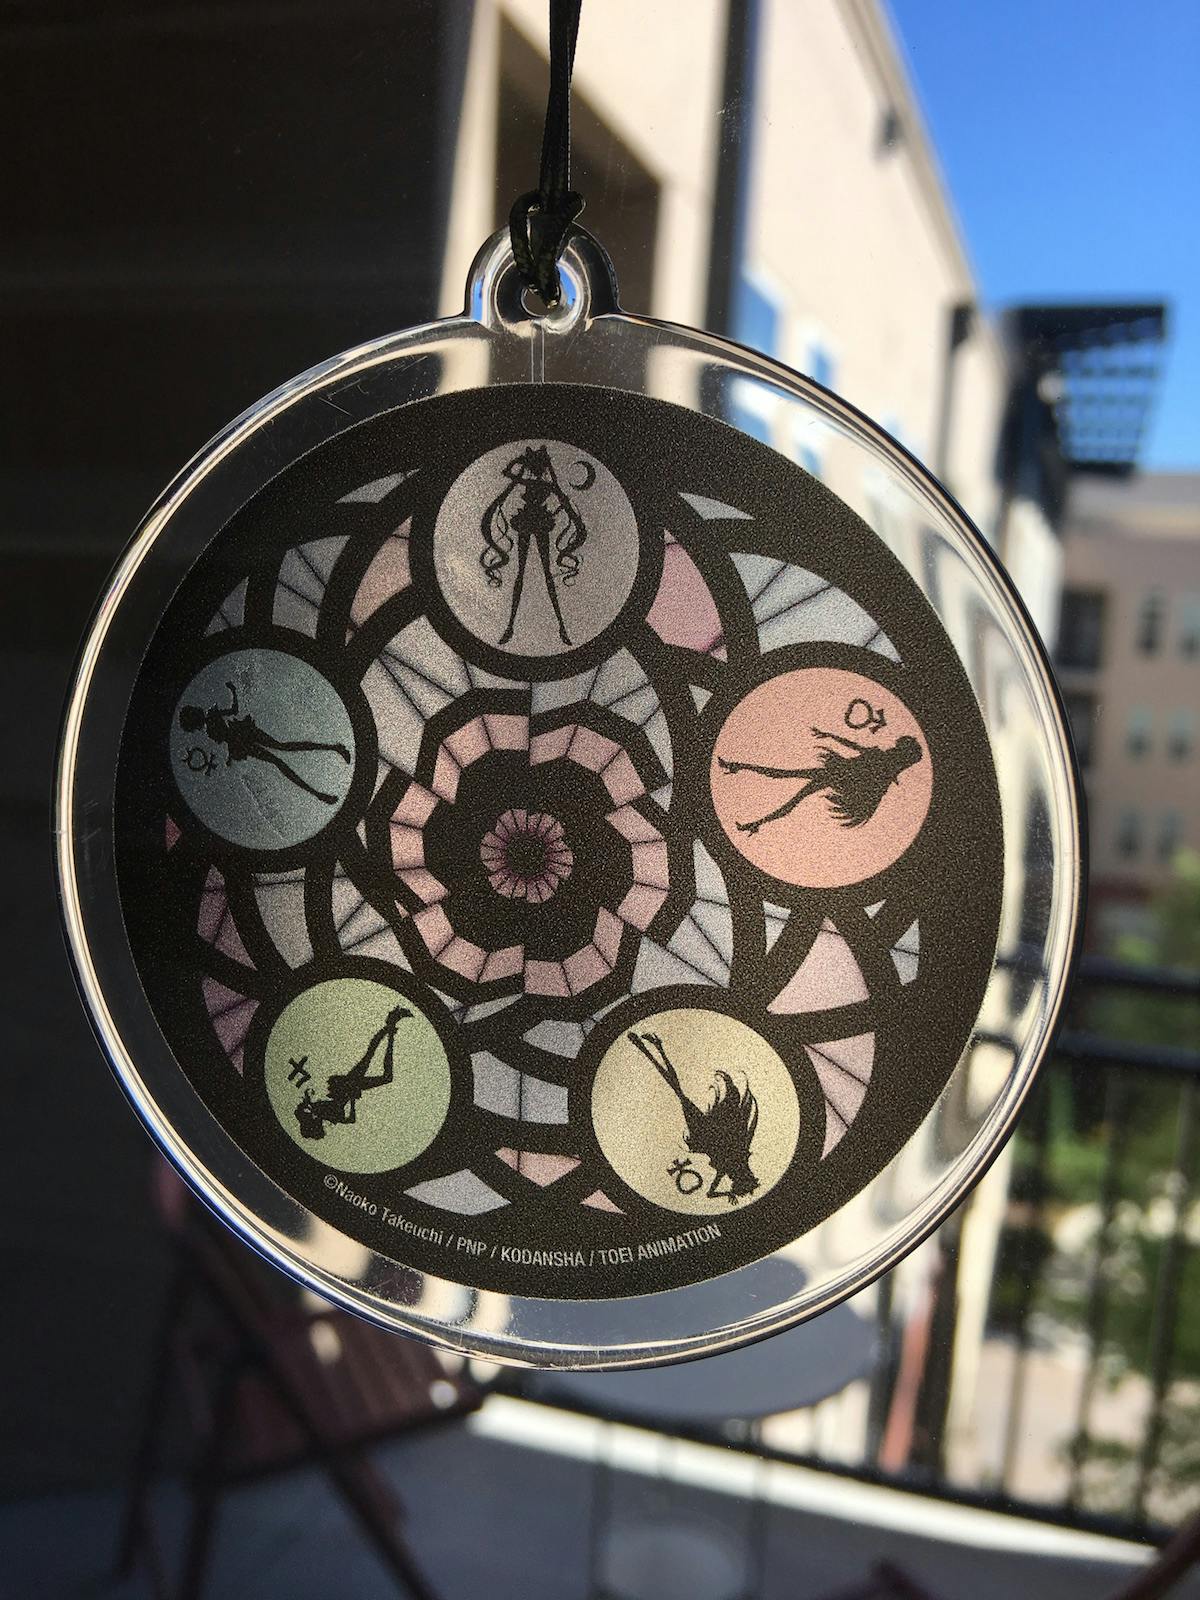 The set also comes with a beautiful suncatcher you can hang in your window.